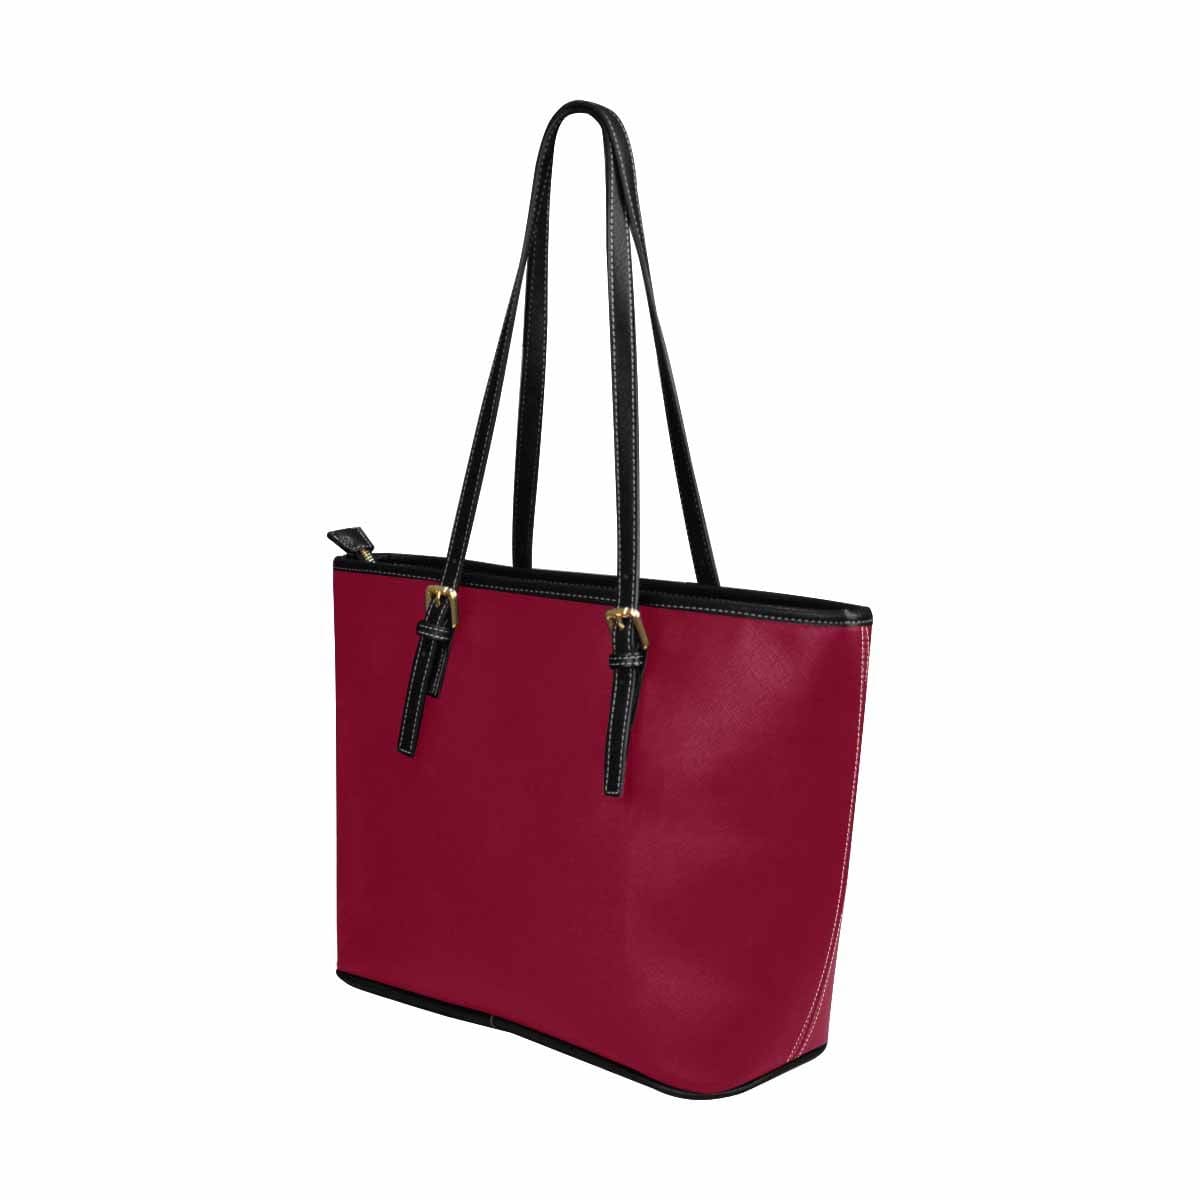 Large Leather Tote Shoulder Bag - Burgundy Red - Bags | Leather Tote Bags